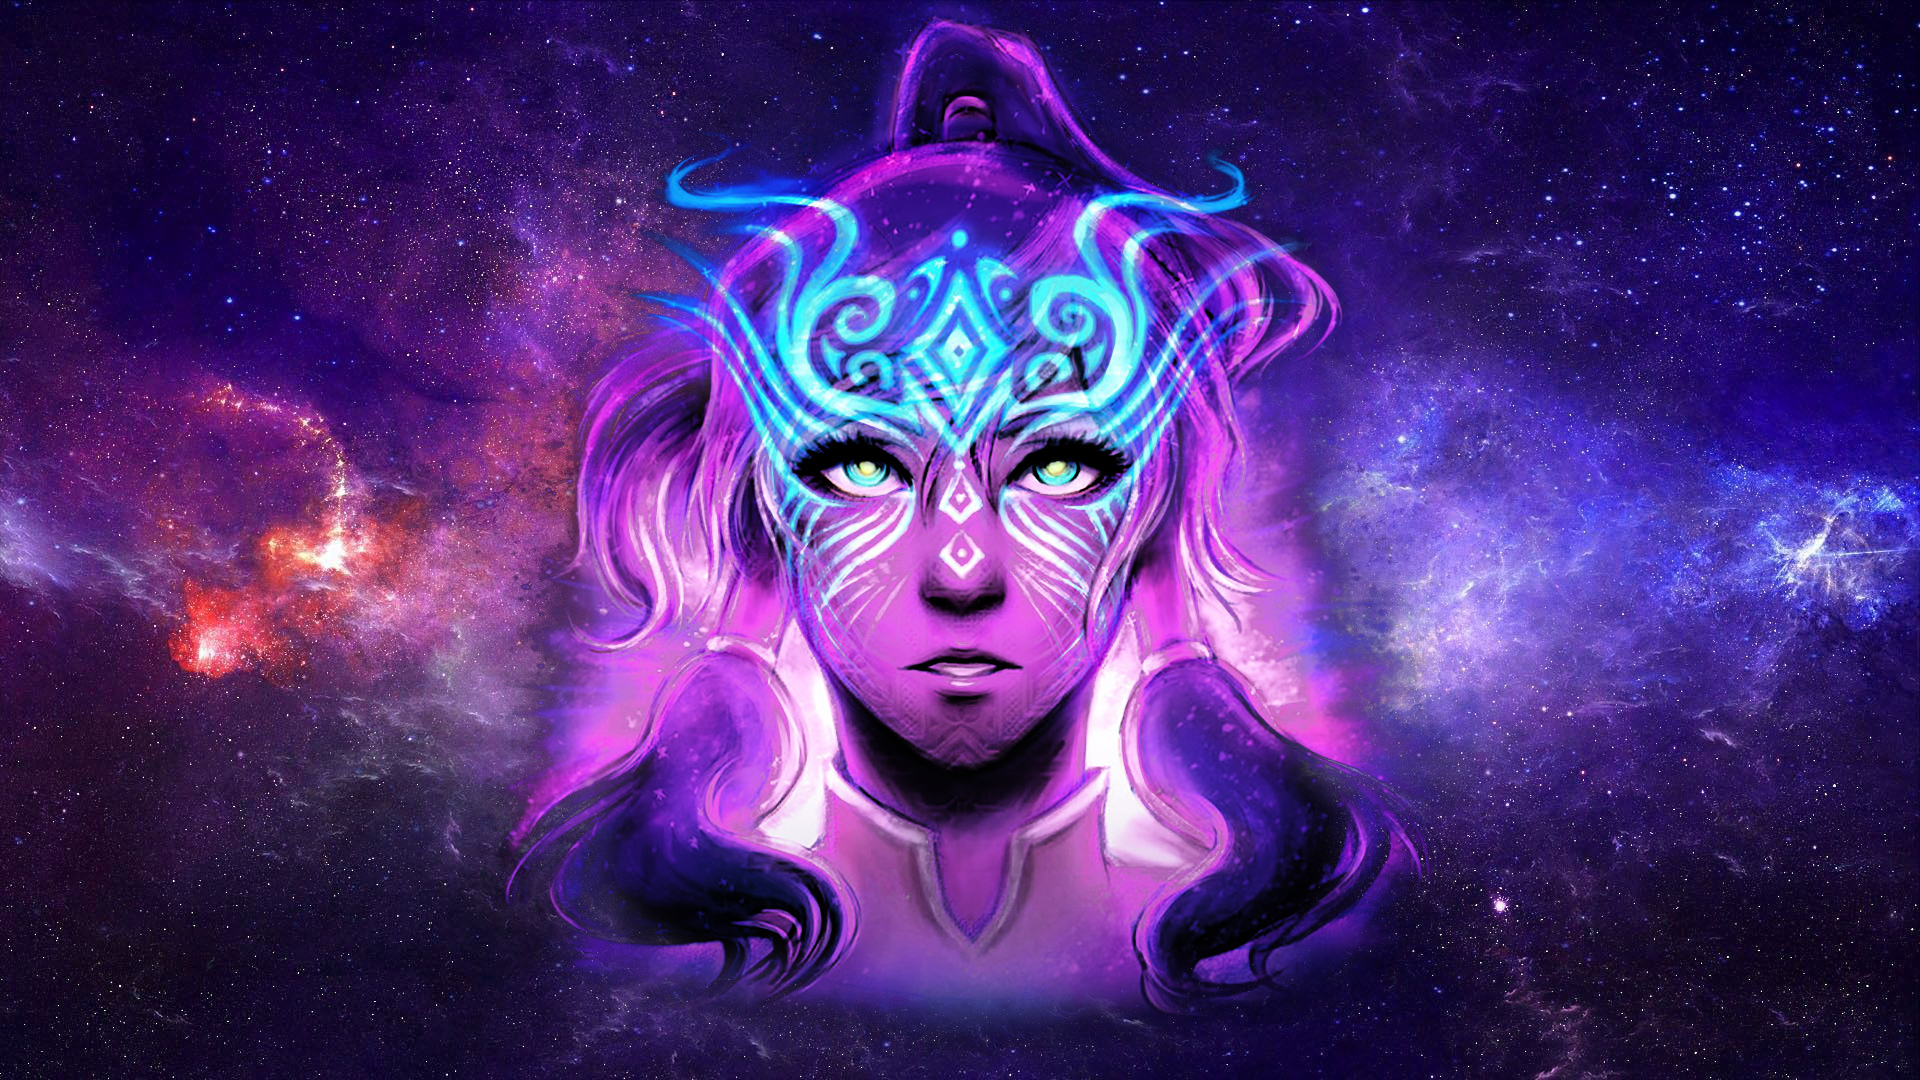 Trippy Girl In Space HD Wallpapers.